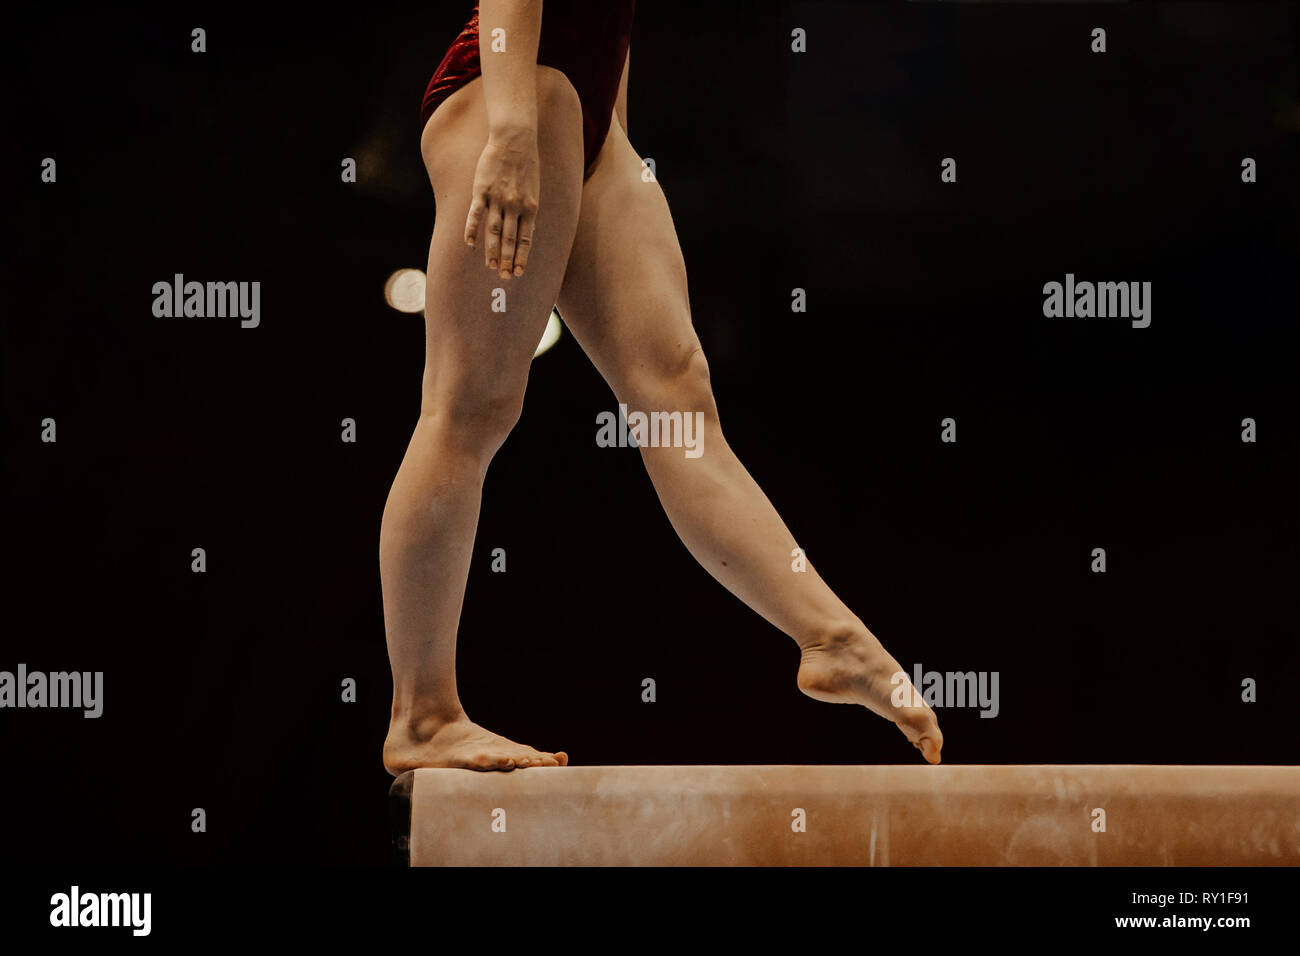 side view balance beam legs female gymnast competition in gymnastics Stock Photo